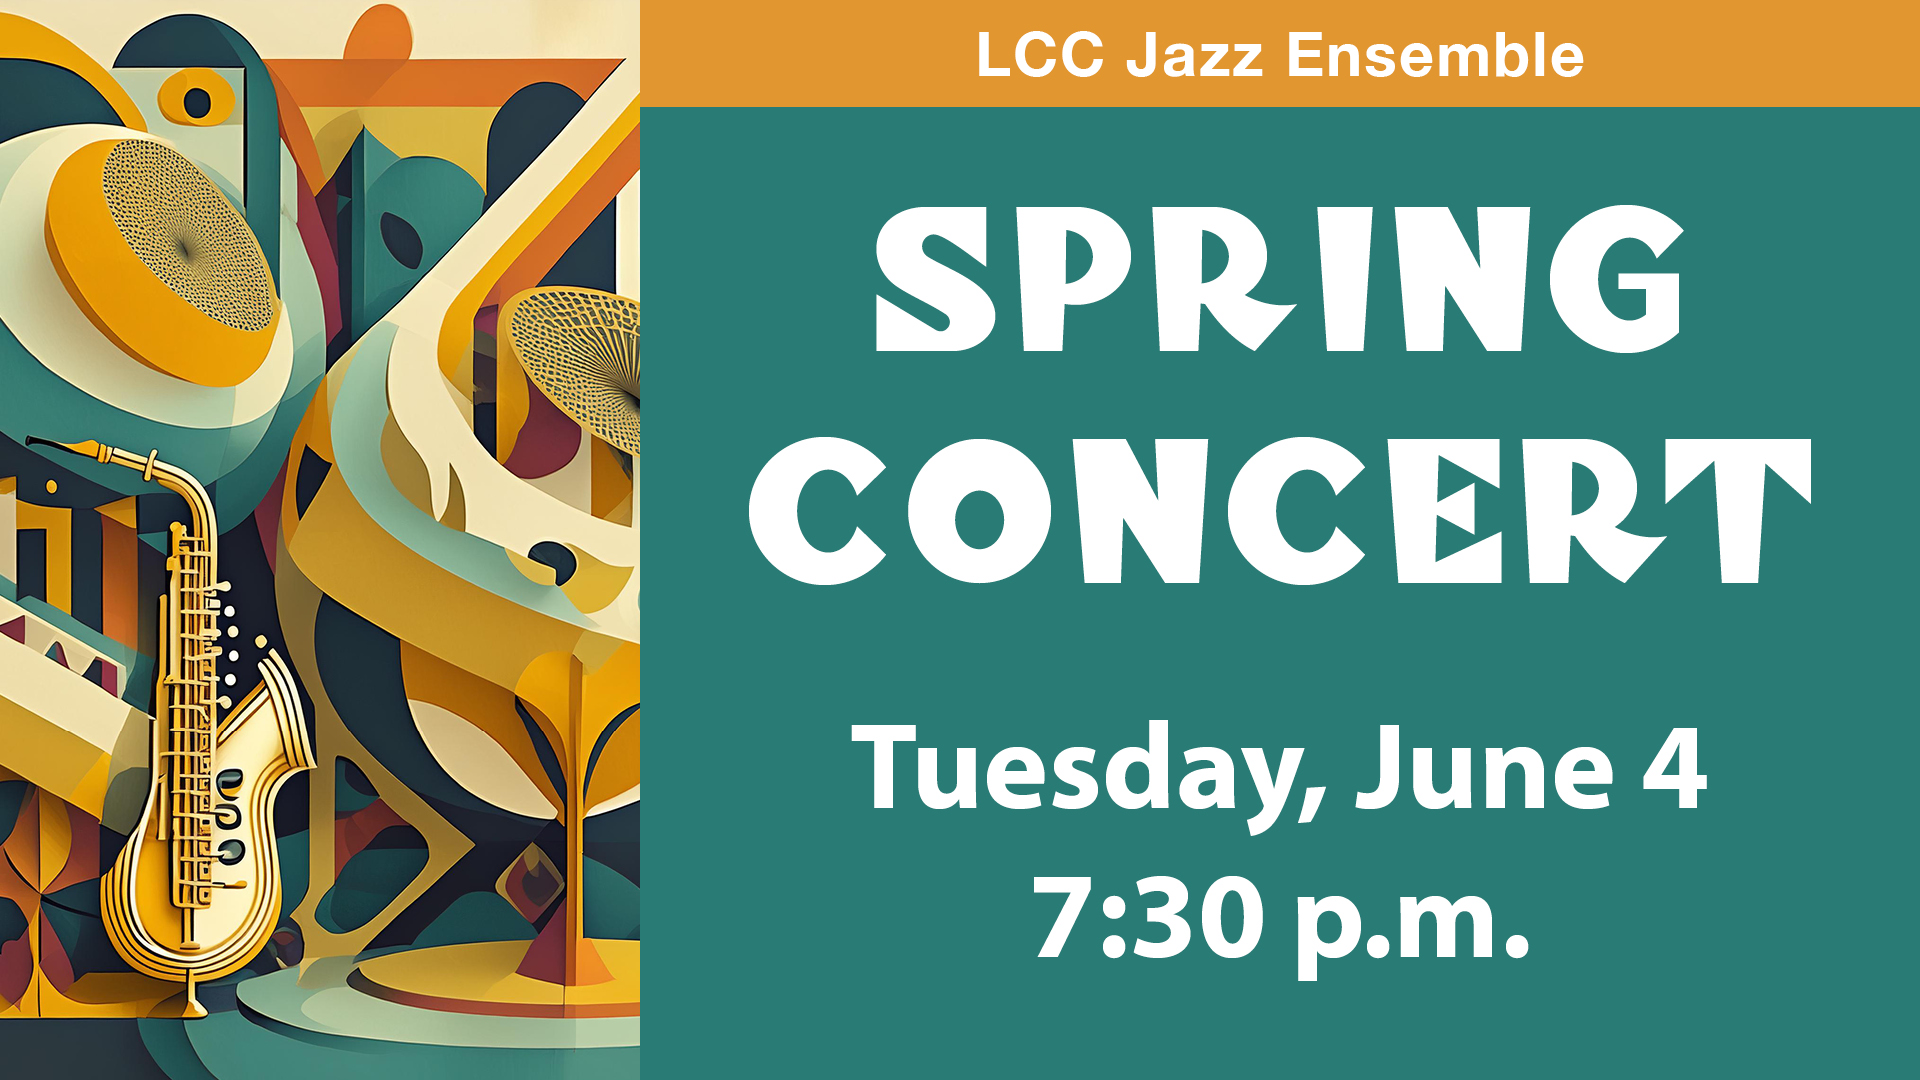 LCC Jazz Ensemble Spring Concert Tuesday, June 4 at 7:30pm. instrumental art on the left side of flyer